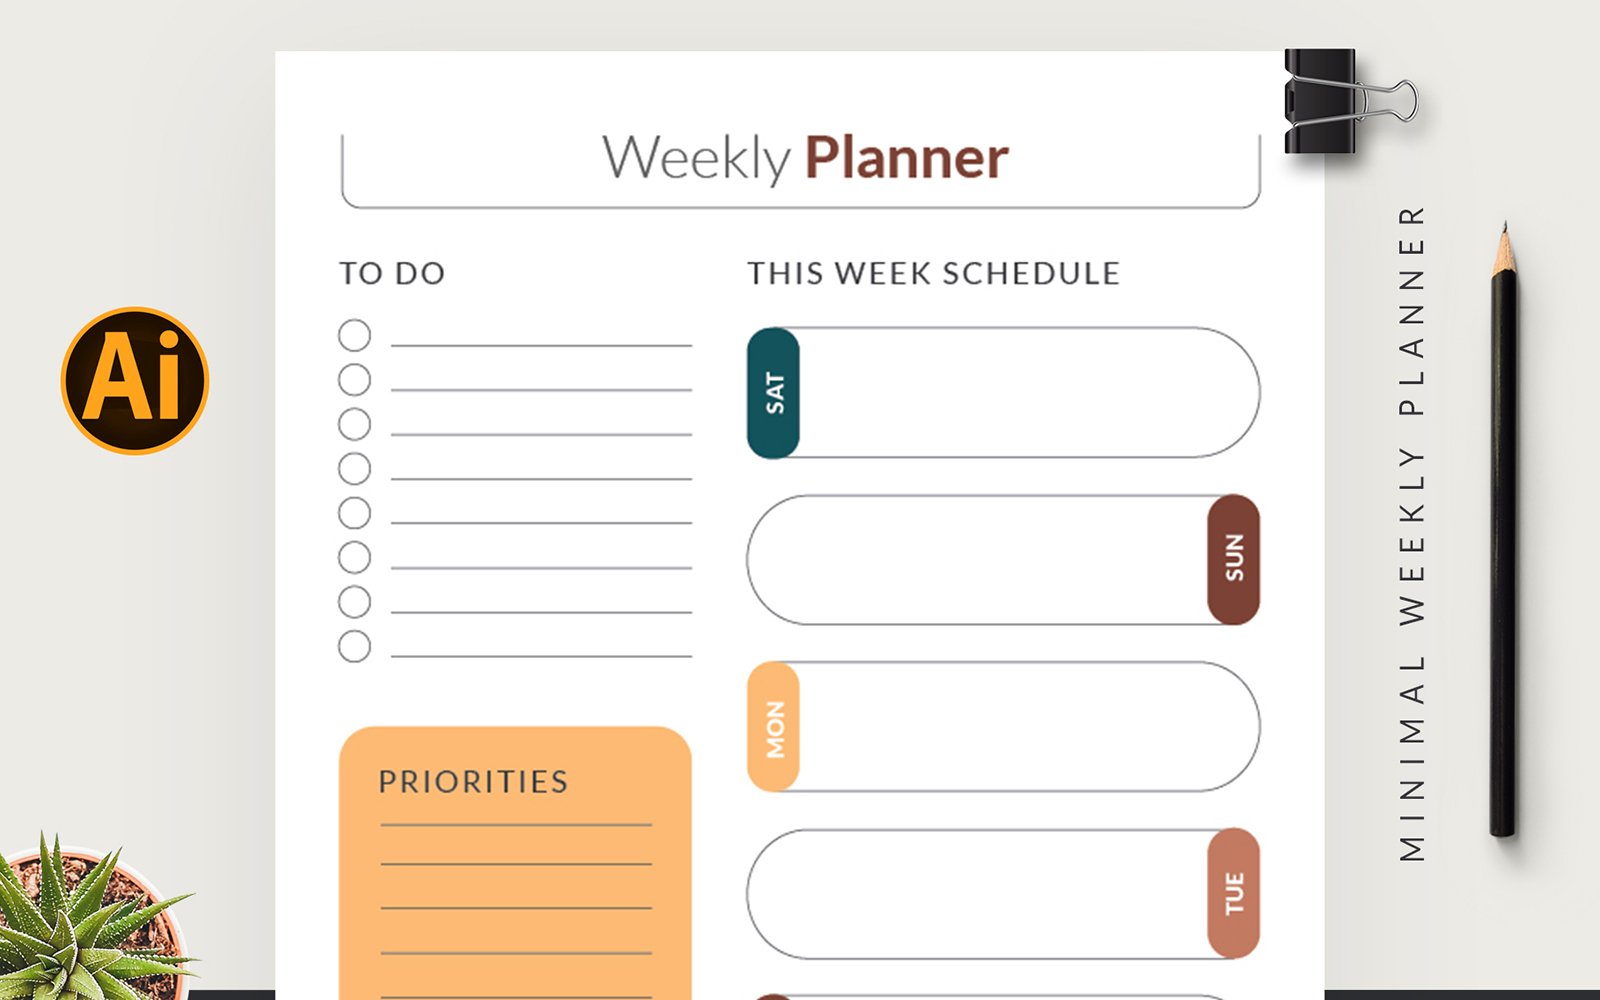 Template #368814 Weekly Planner Webdesign Template - Logo template Preview